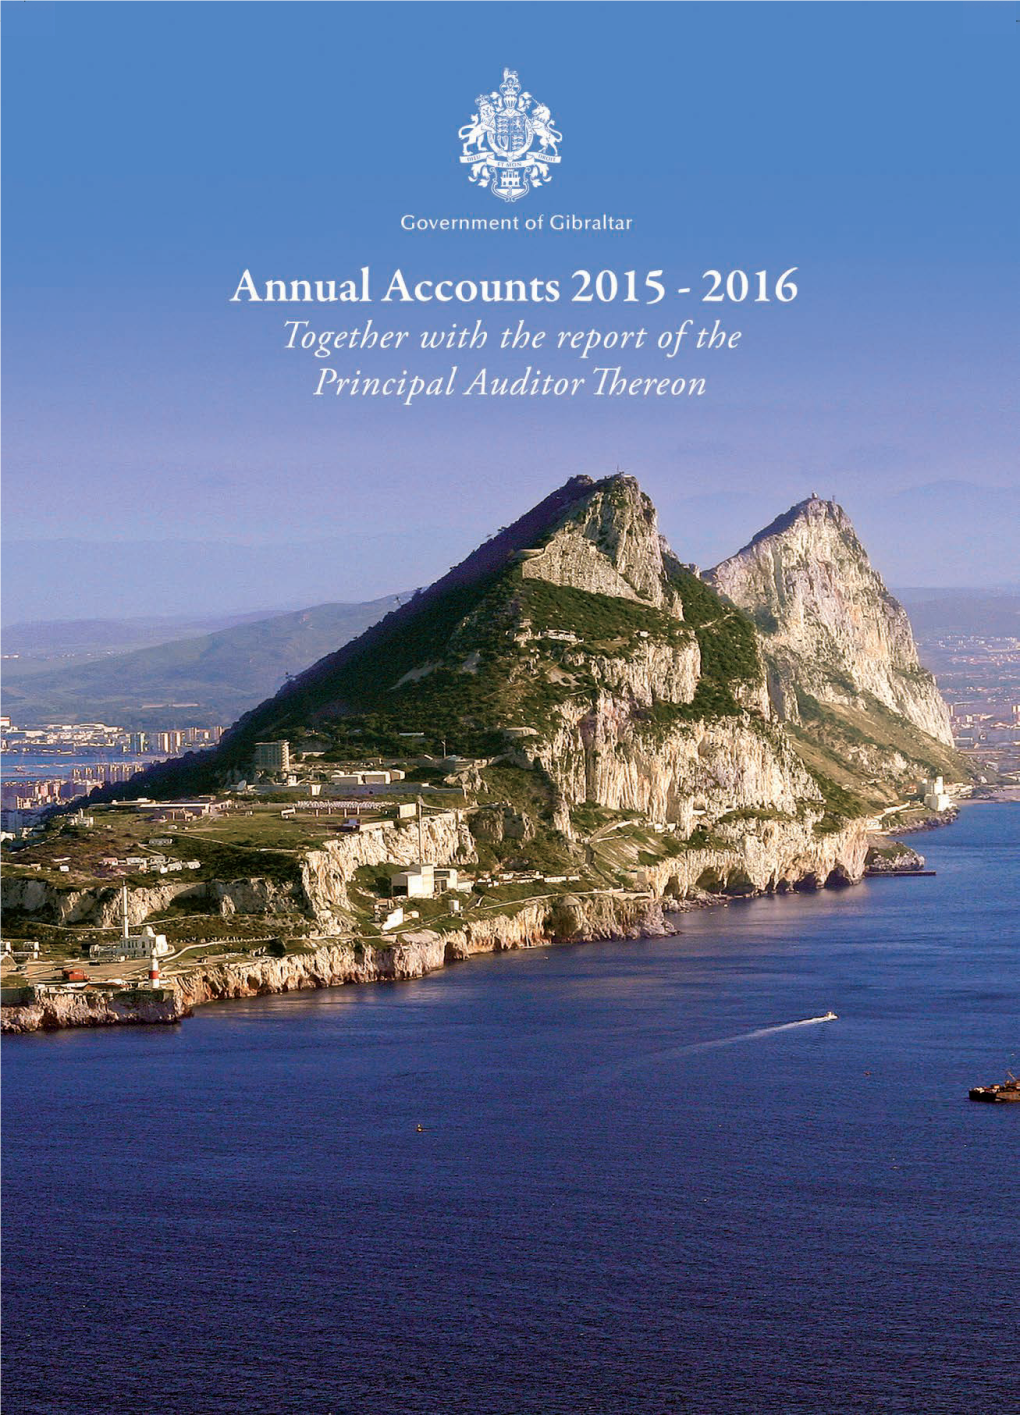 Government of Gibraltar Annual Accounts